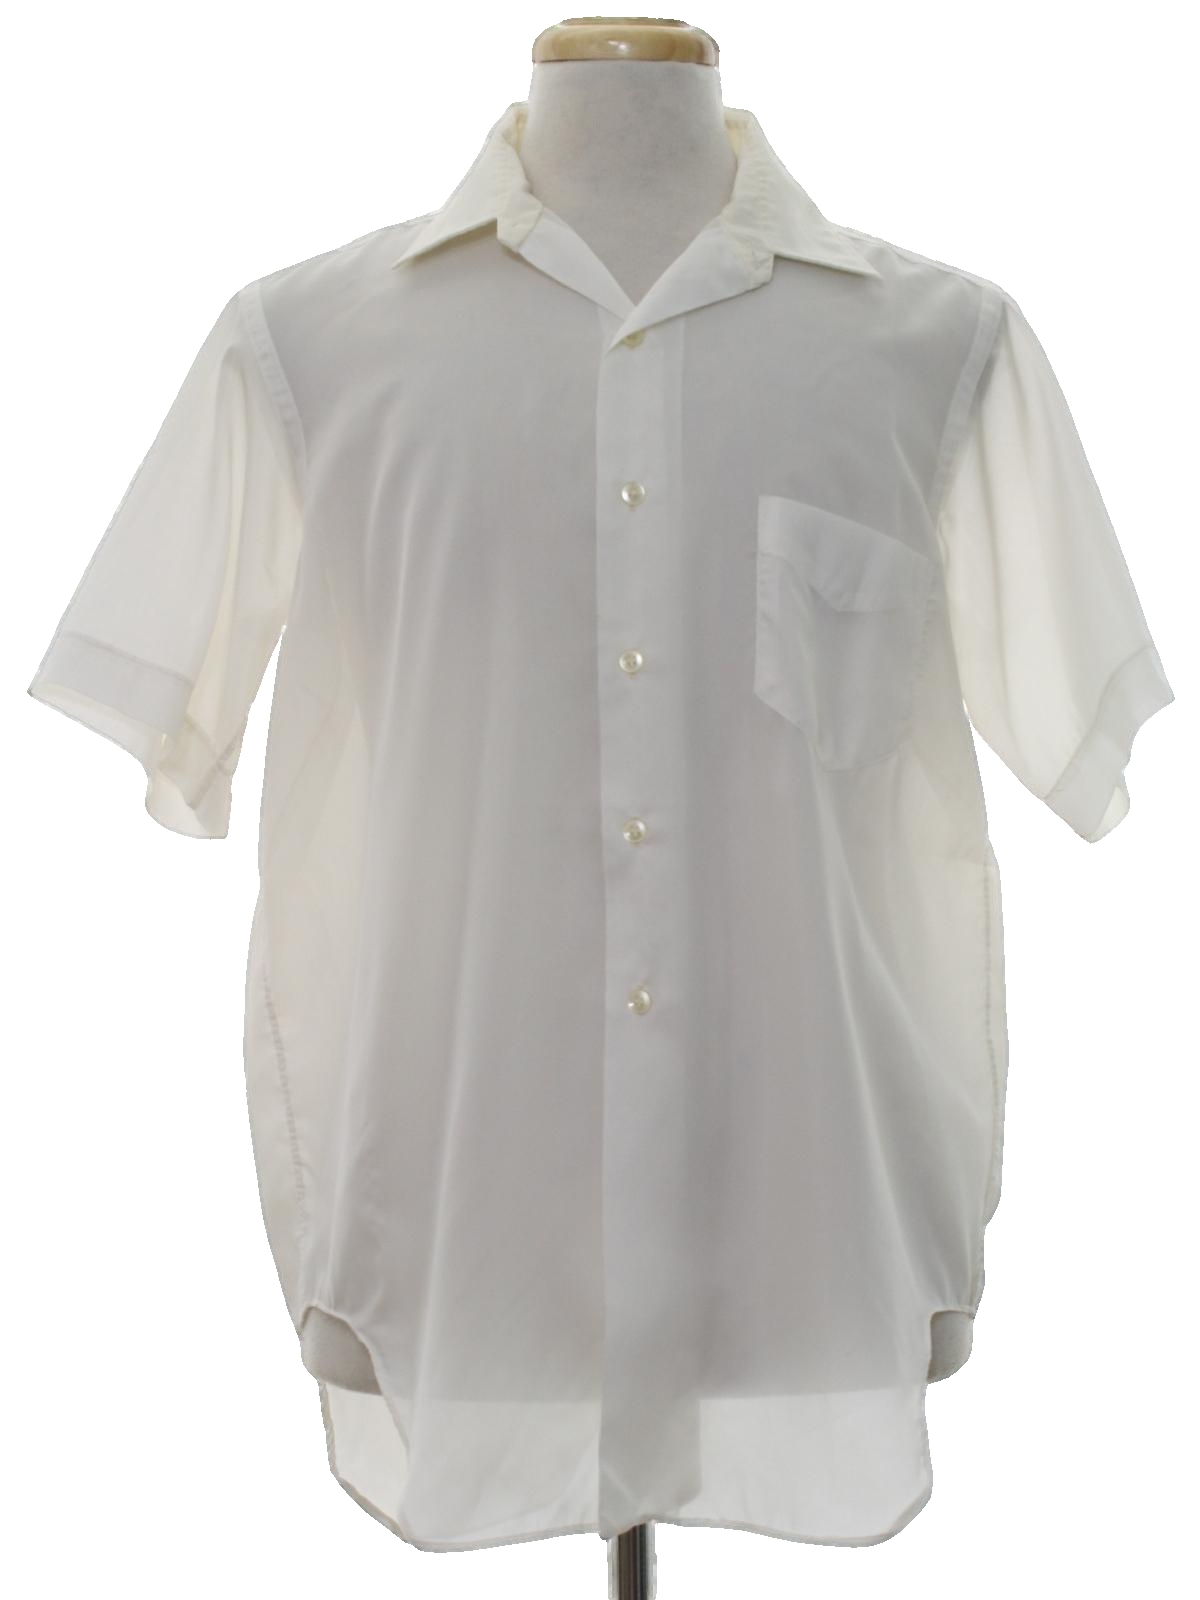 Sixties Vintage Shirt: 60s -National Shirt Shops- Mens white background ...